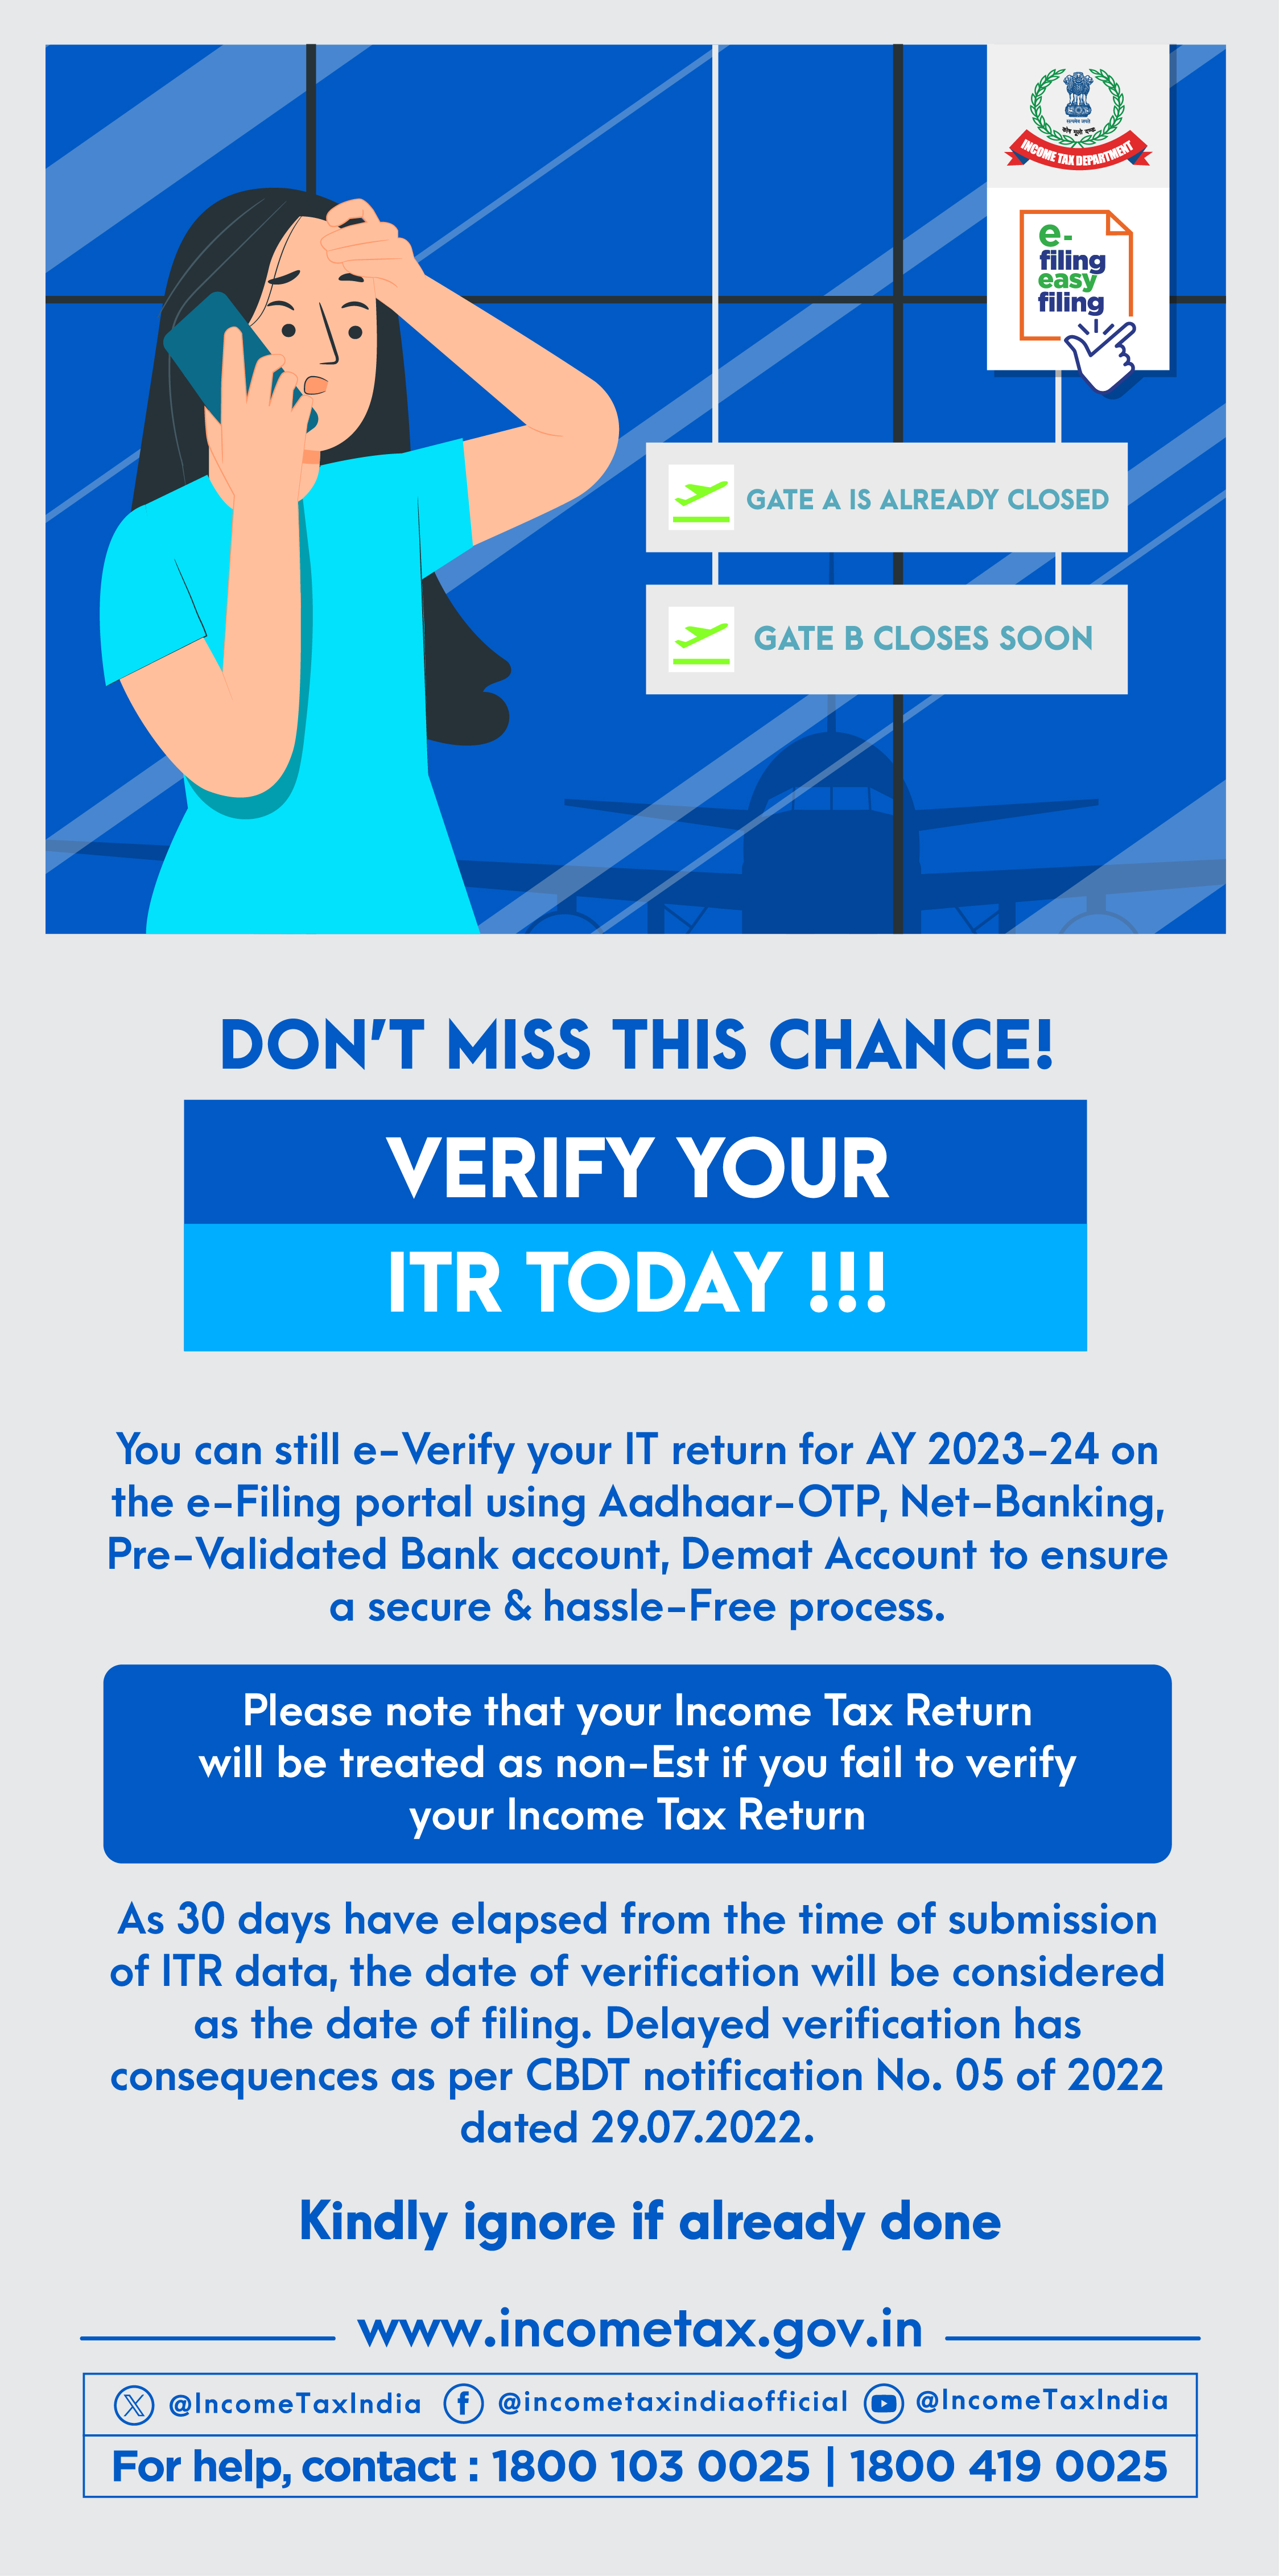 File your ITR for AY2023-24 